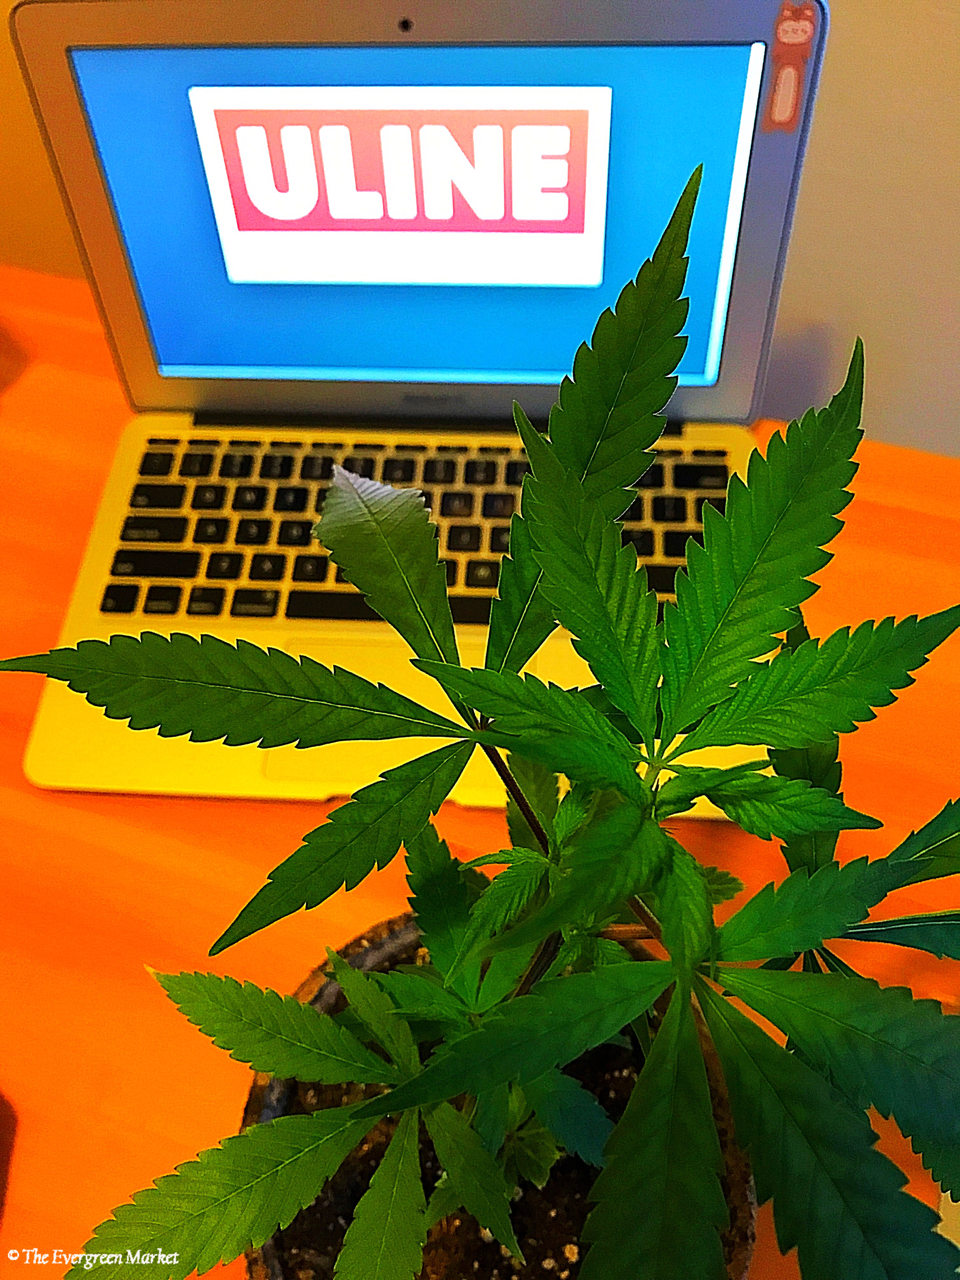 ULINE attacks the cannabis industry